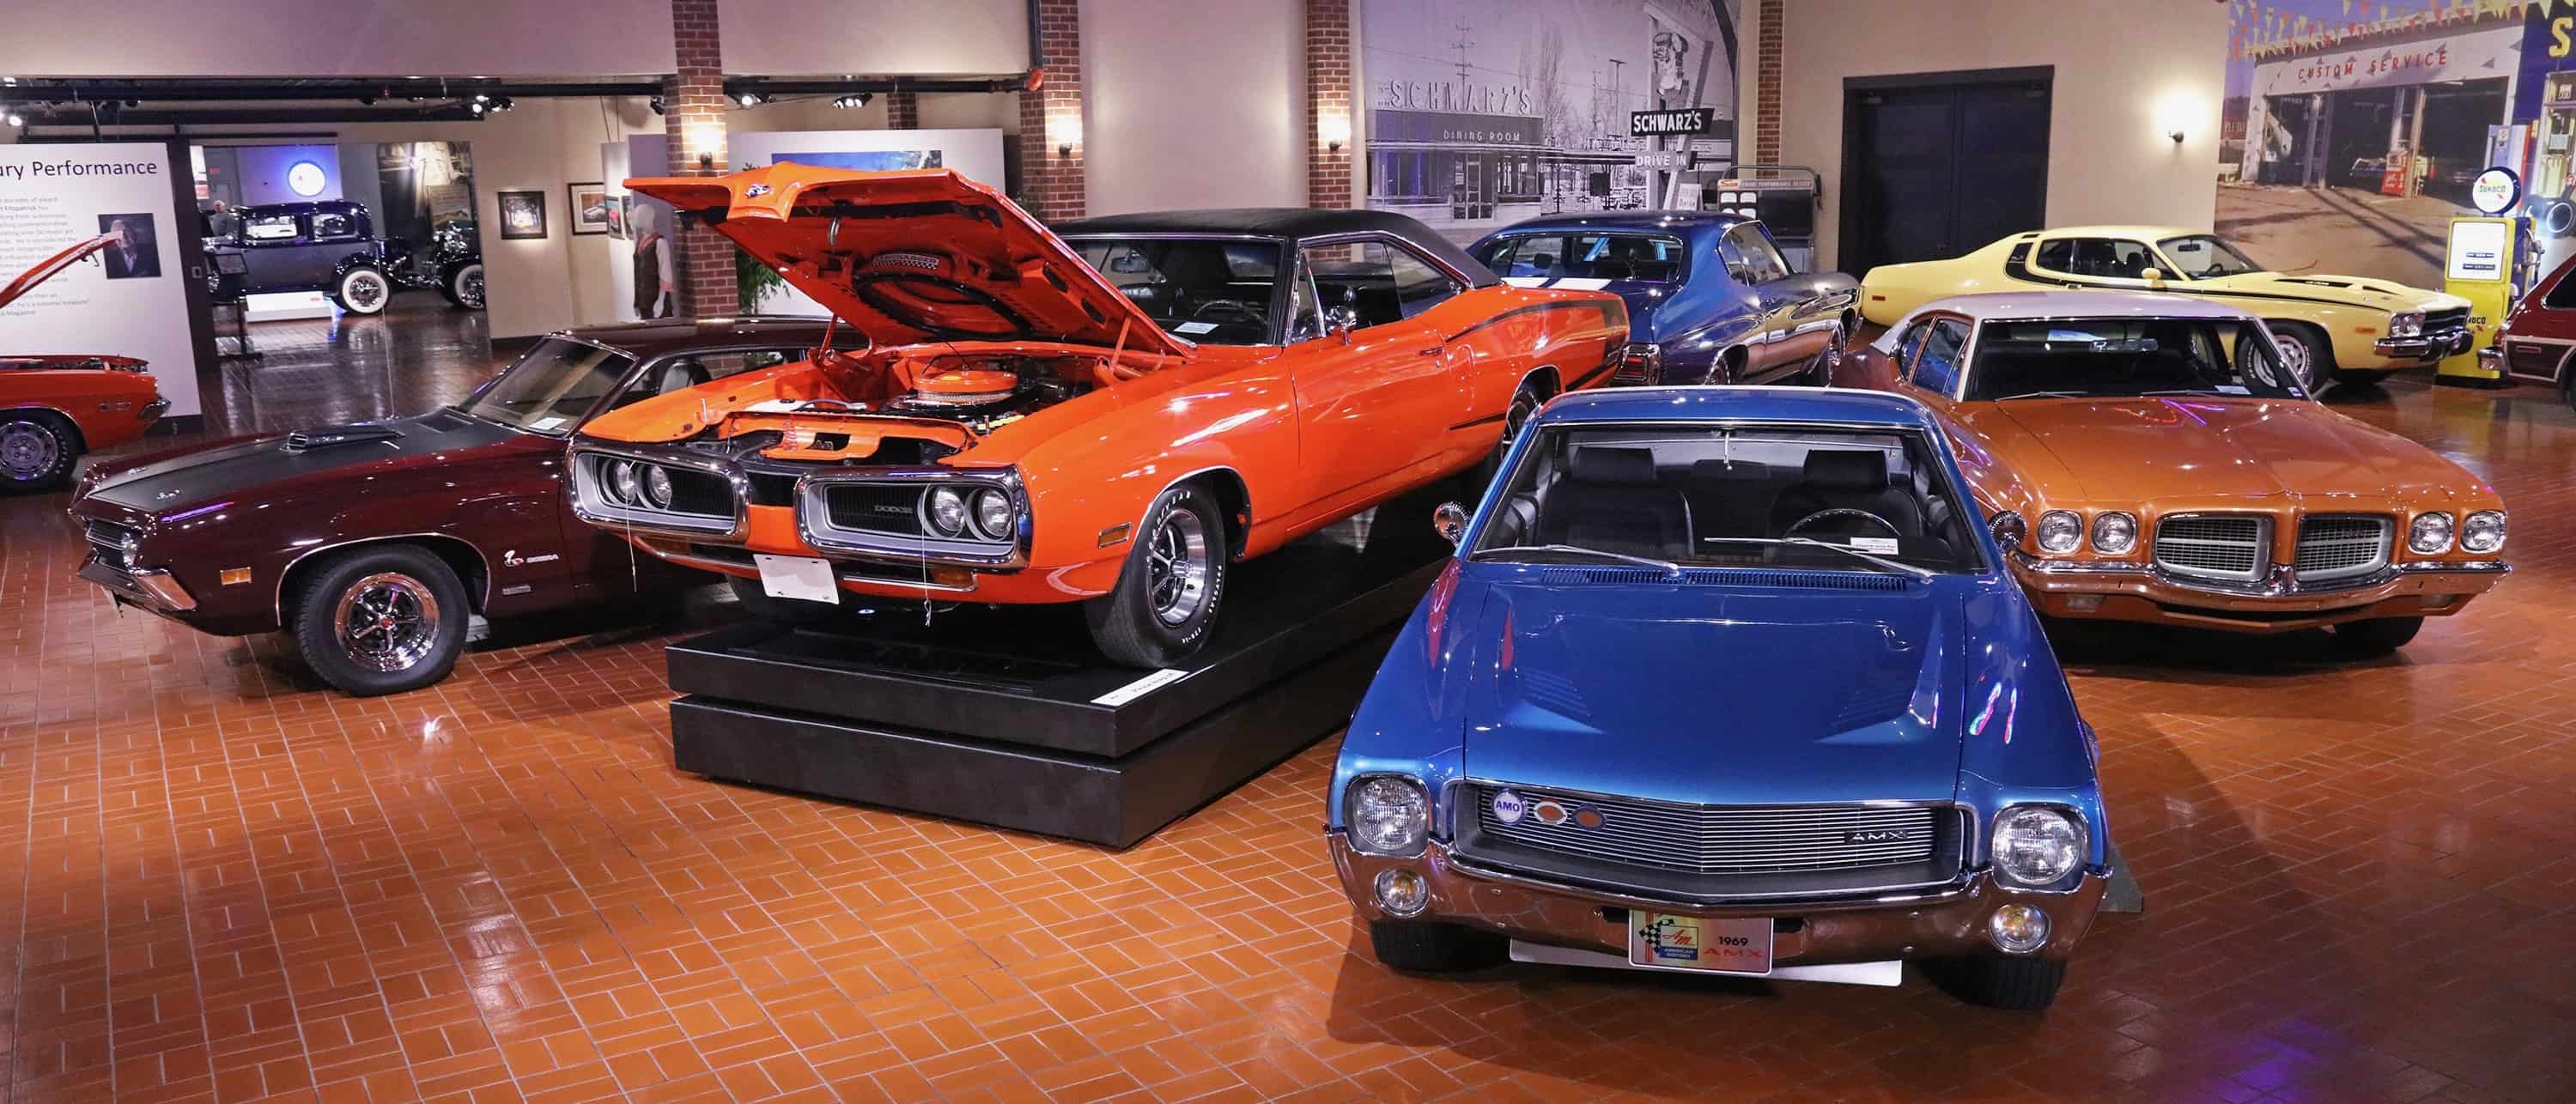 Muscle cars featured in 2018 at the Gilmore museum | ClassicCars.com